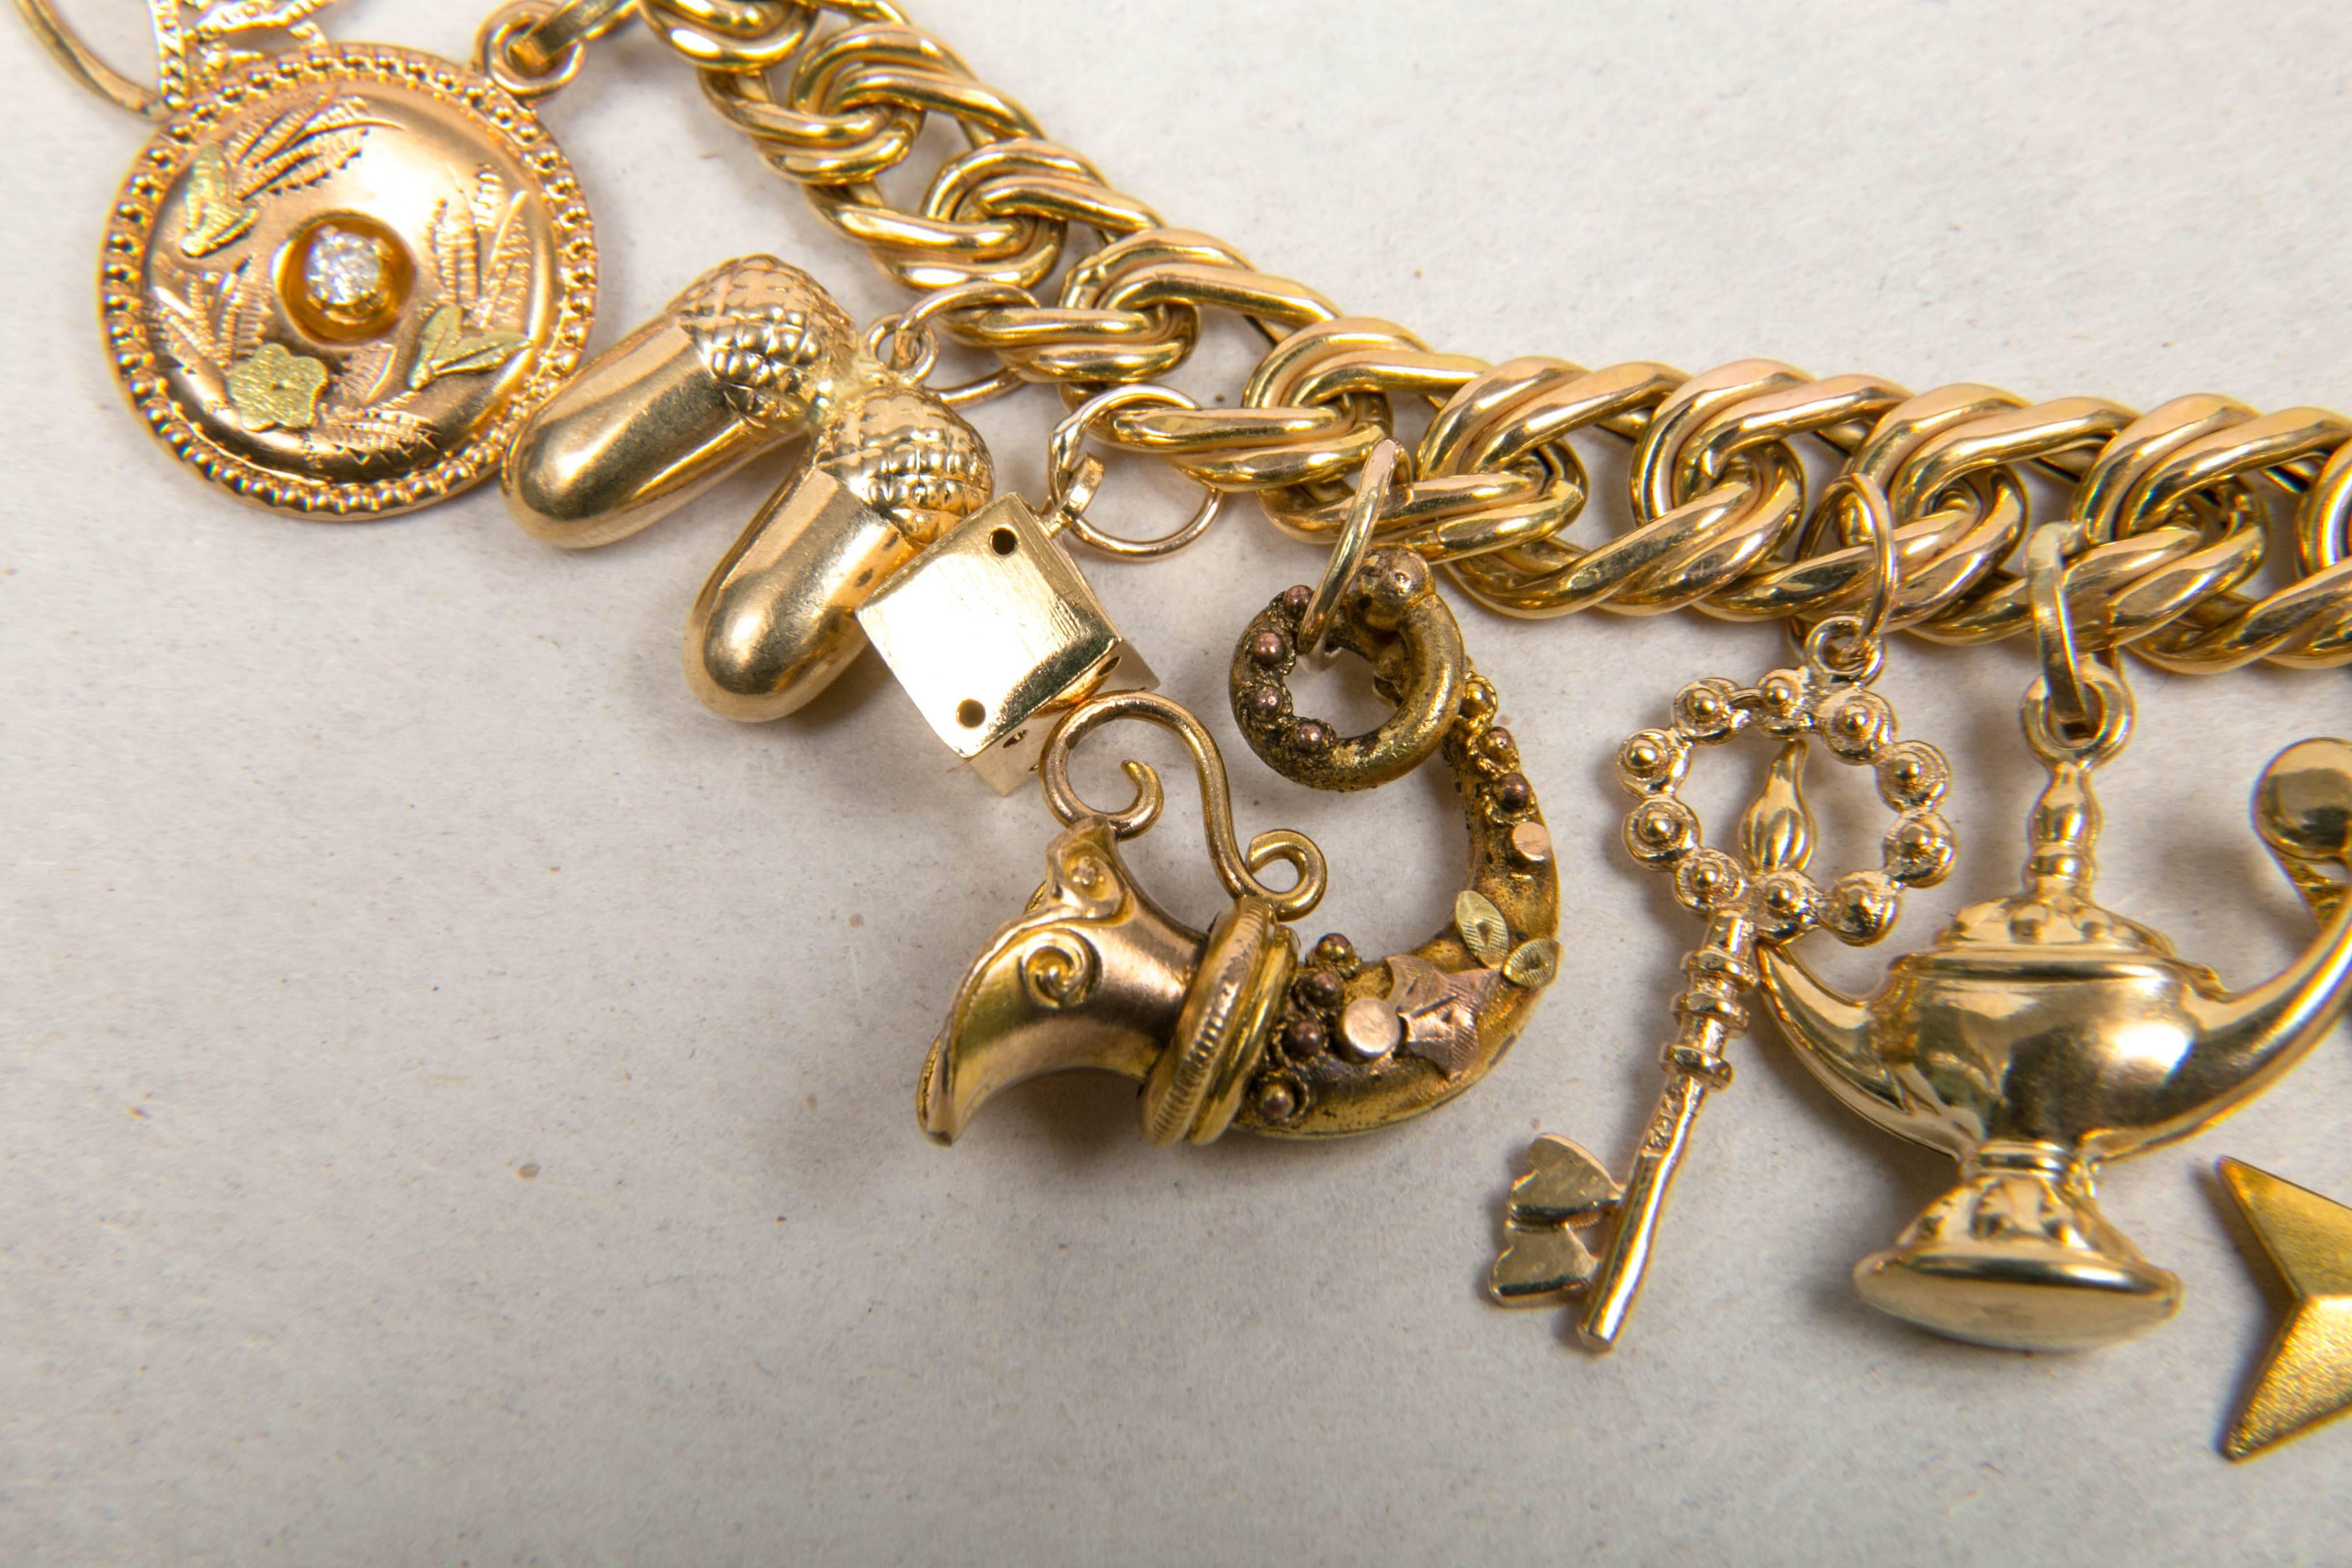  Victorian And Mid Century Charm Bracelet In Good Condition For Sale In St.amford, CT